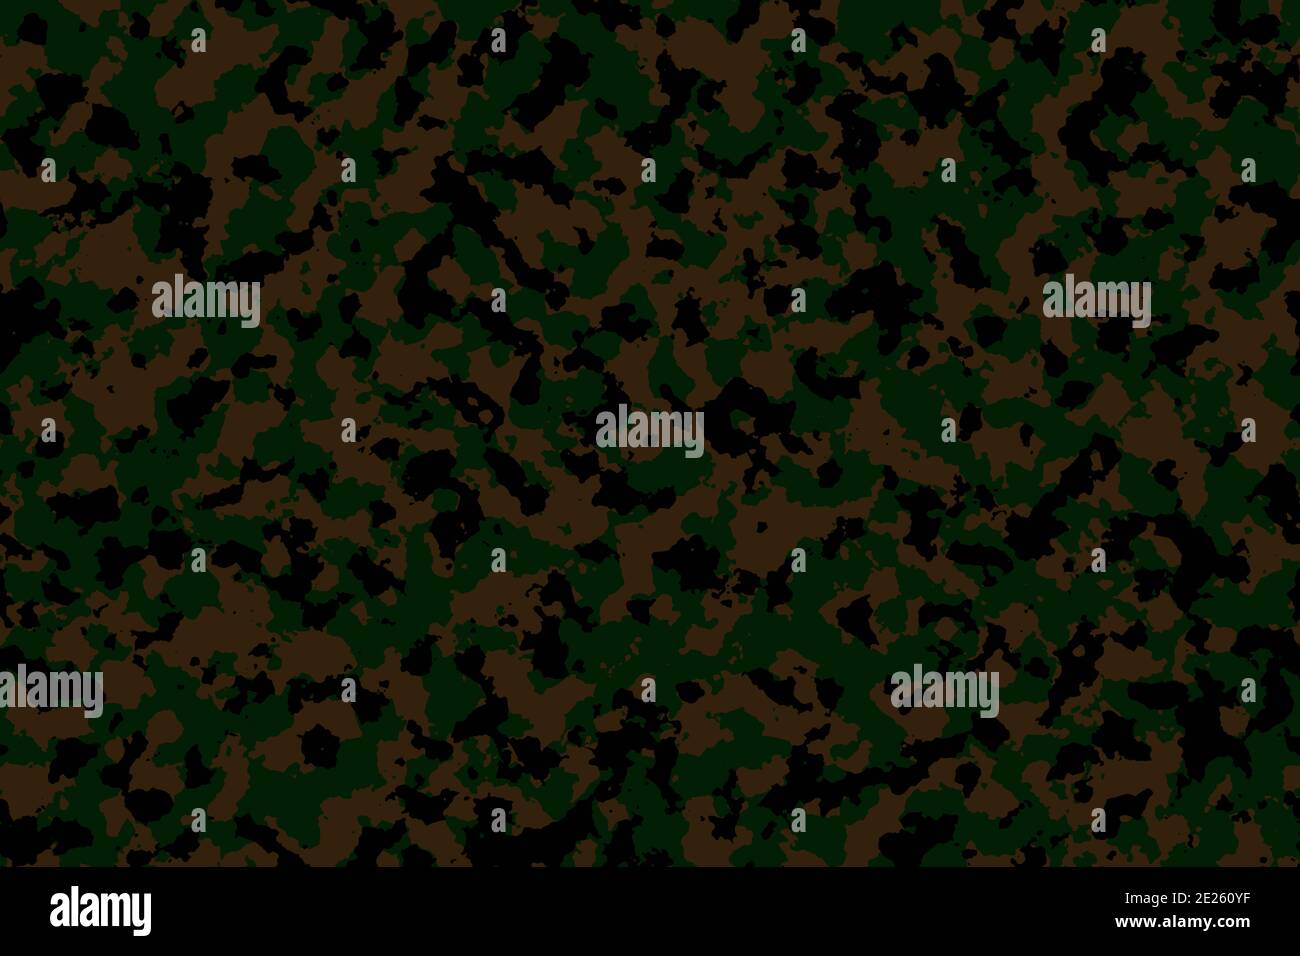 Camouflage pattern background. Military green brown black color forest texture illustration Stock Photo